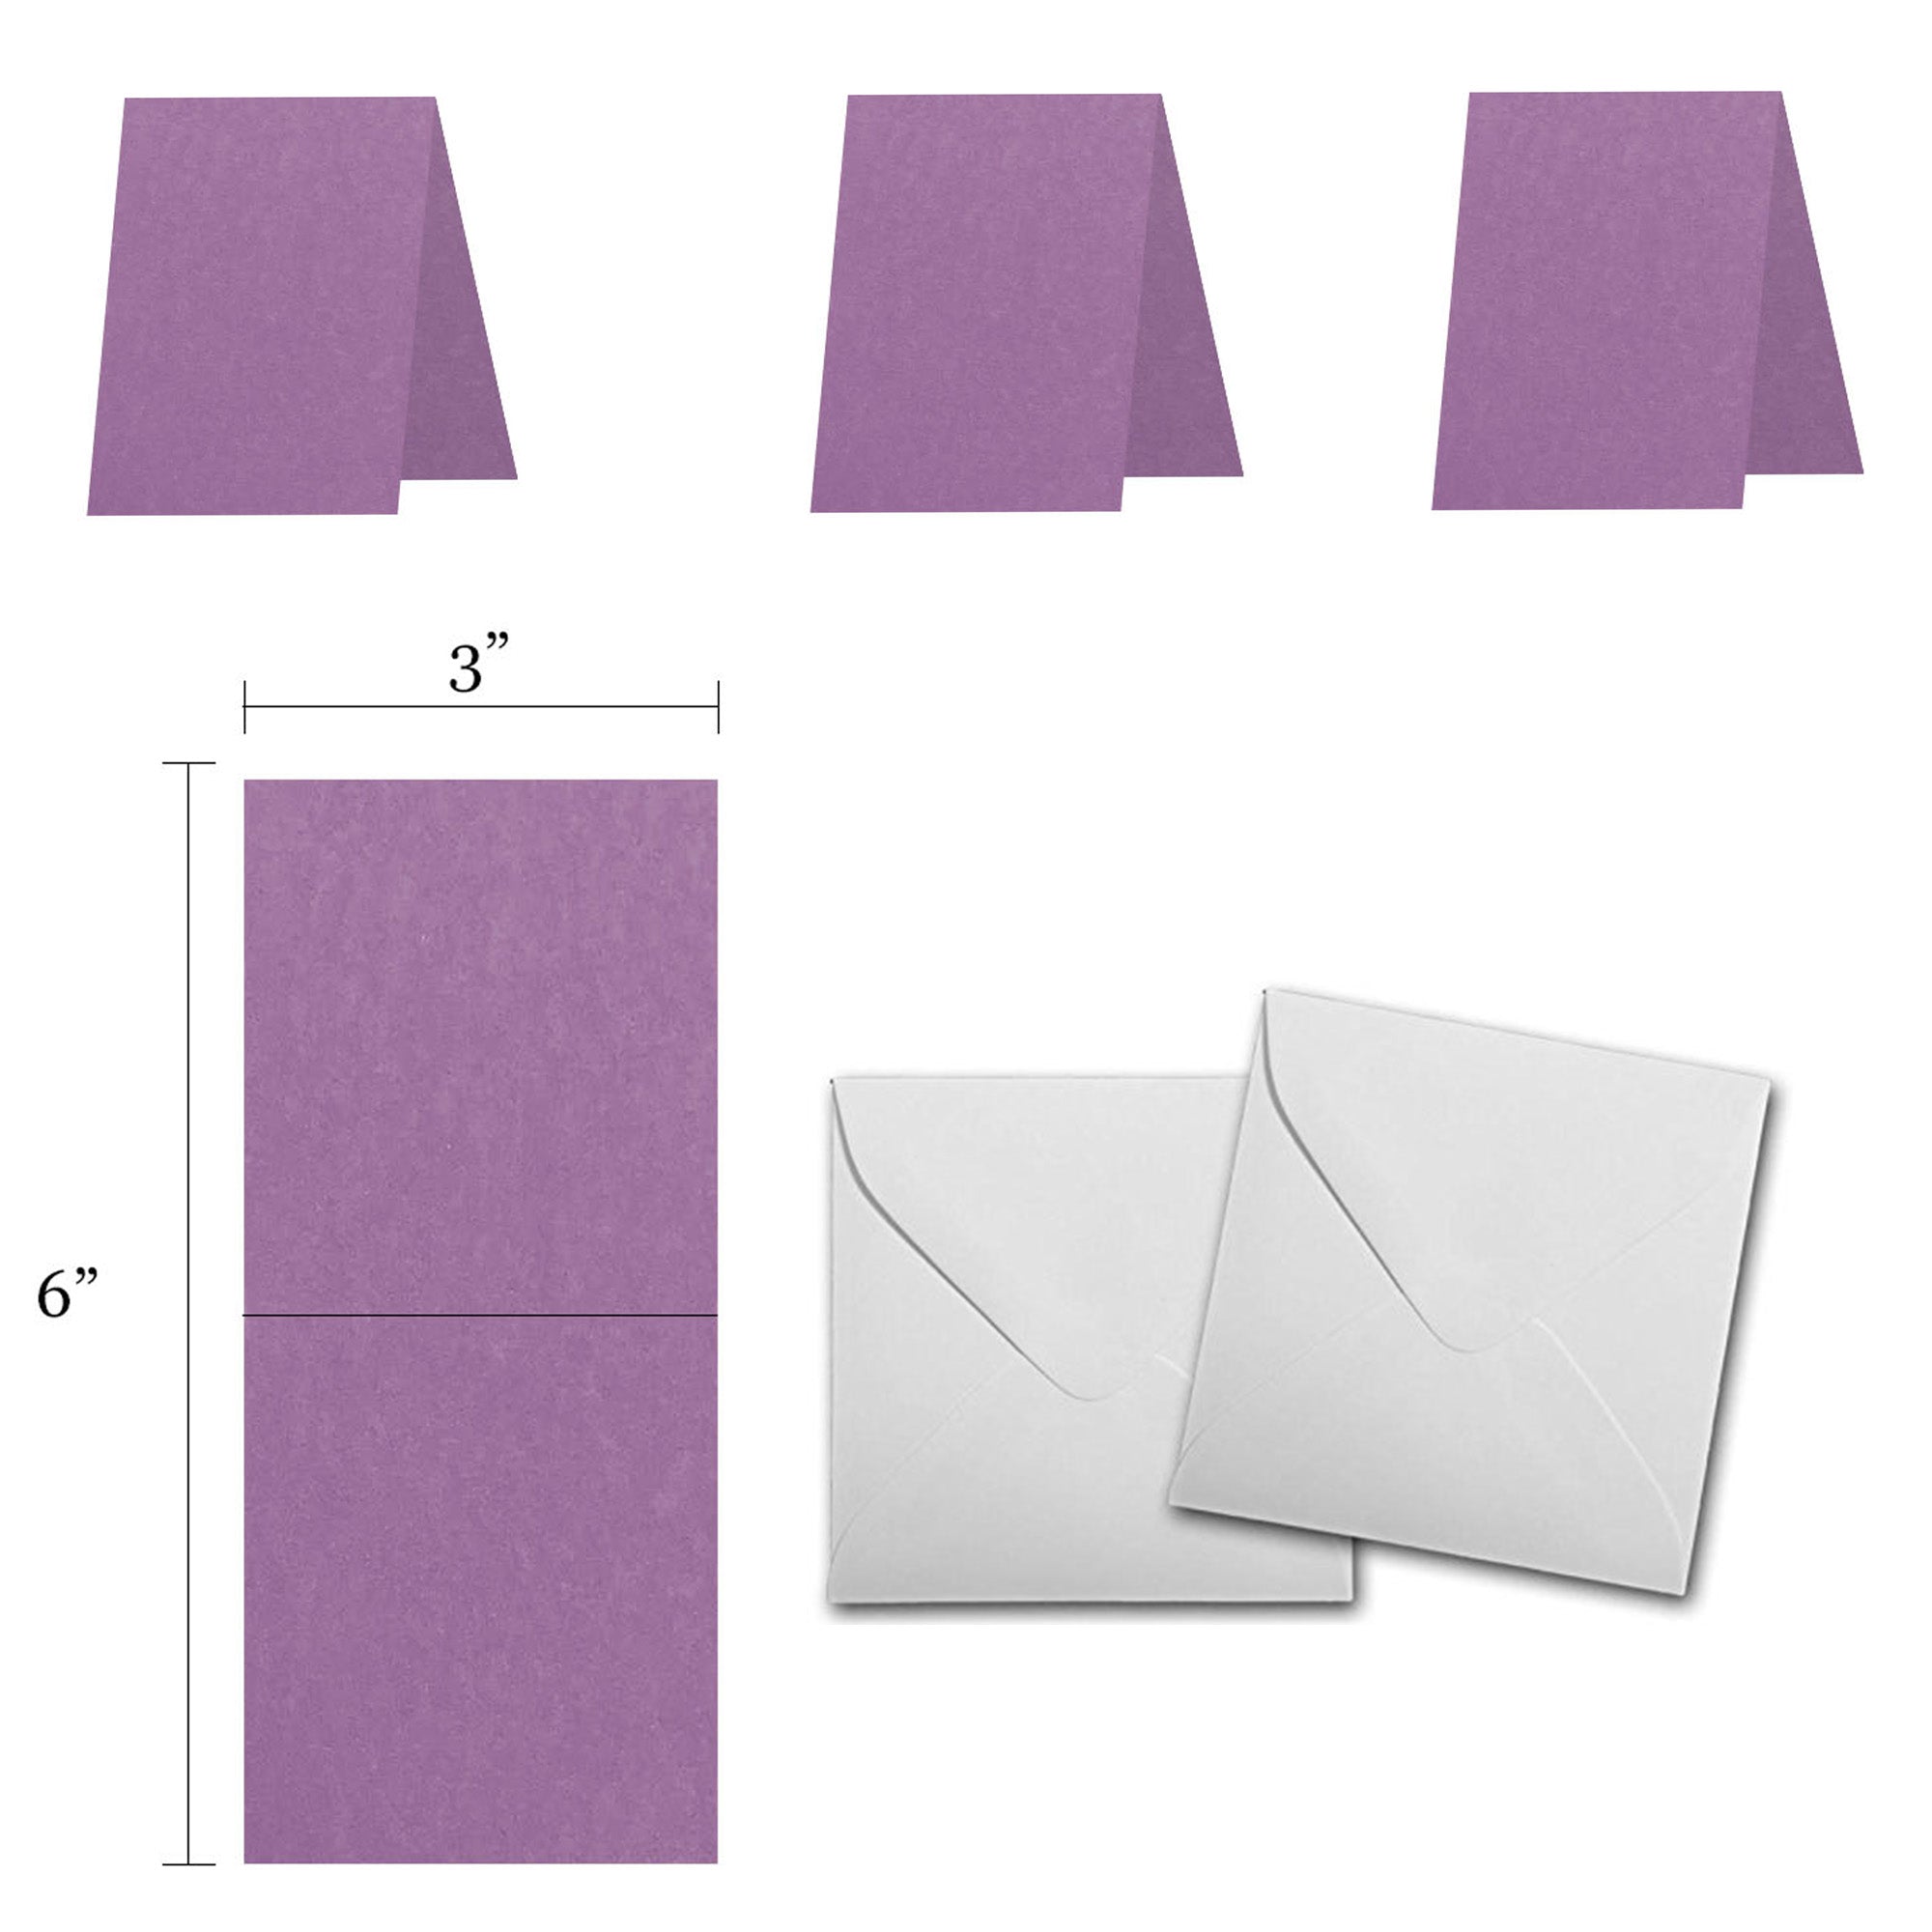 Discount Mini Folded Card Stock with envelopes for gift tags - CutCardStock